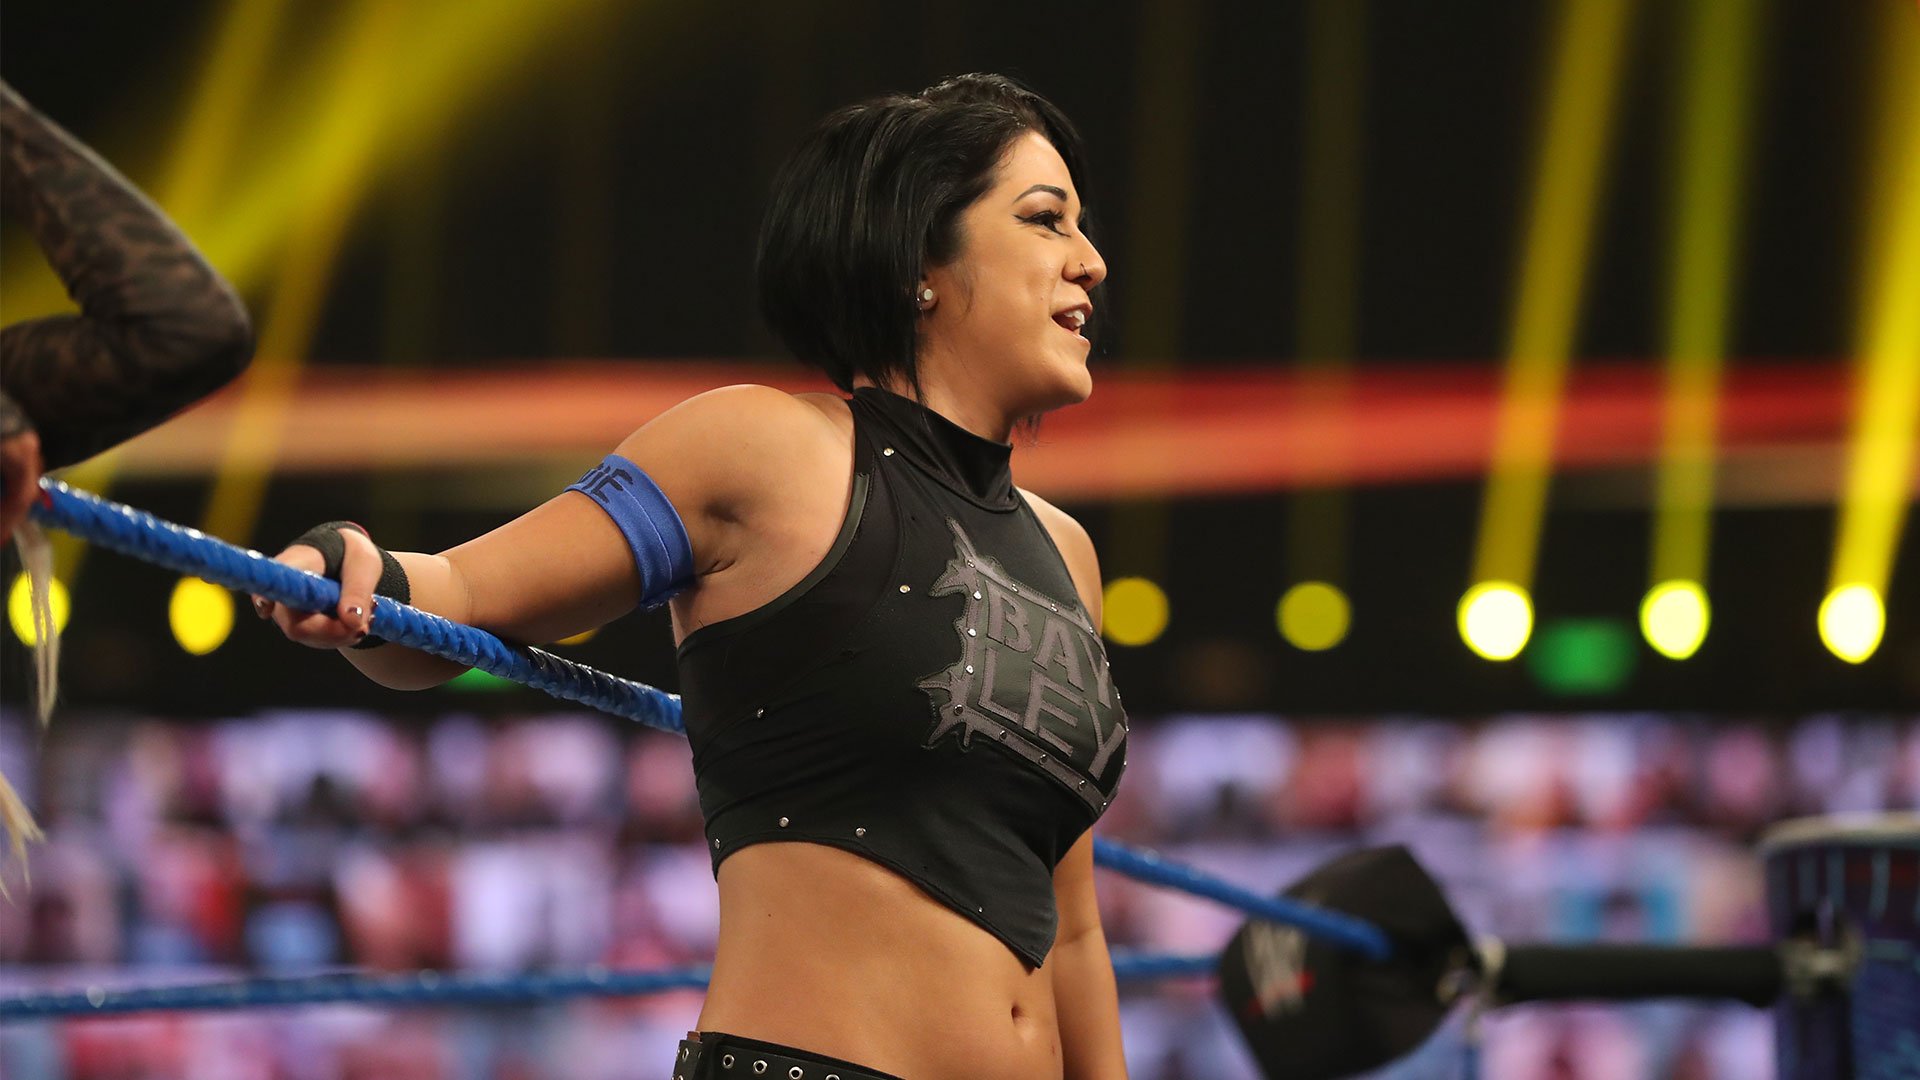 Bayley speaks on recent WWE releases – “Most of them are really good friends and so talented”